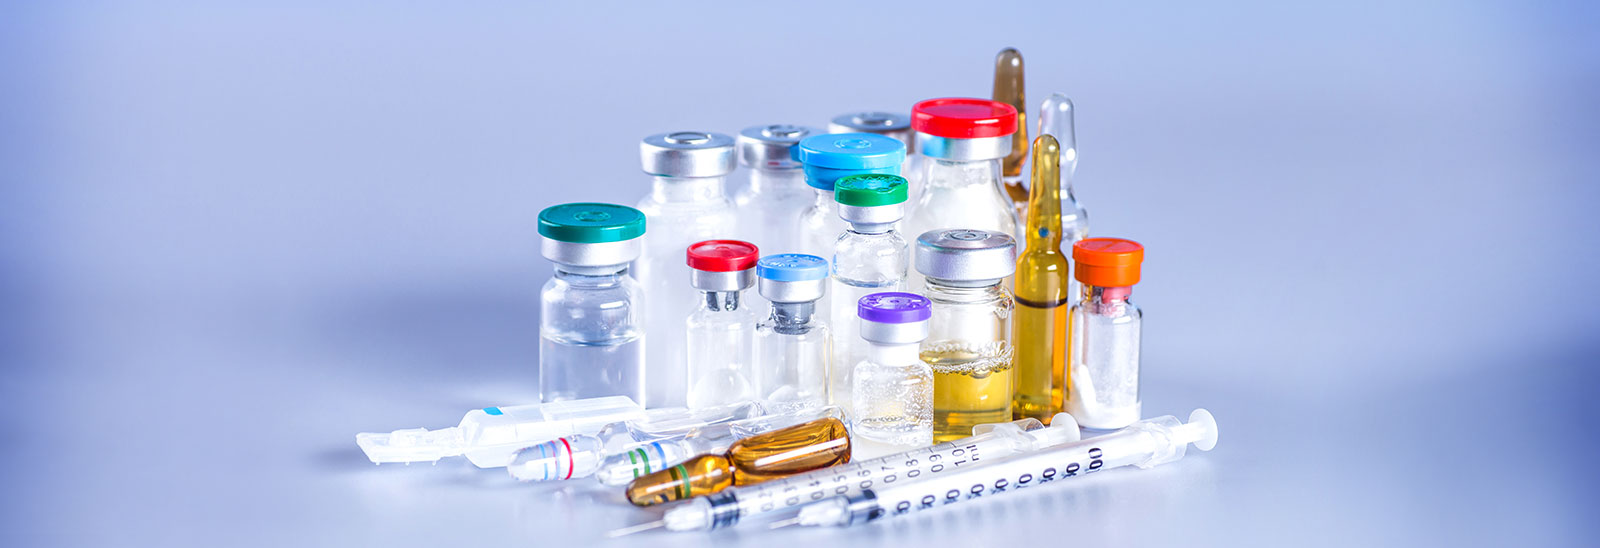 Generic Injectables Market